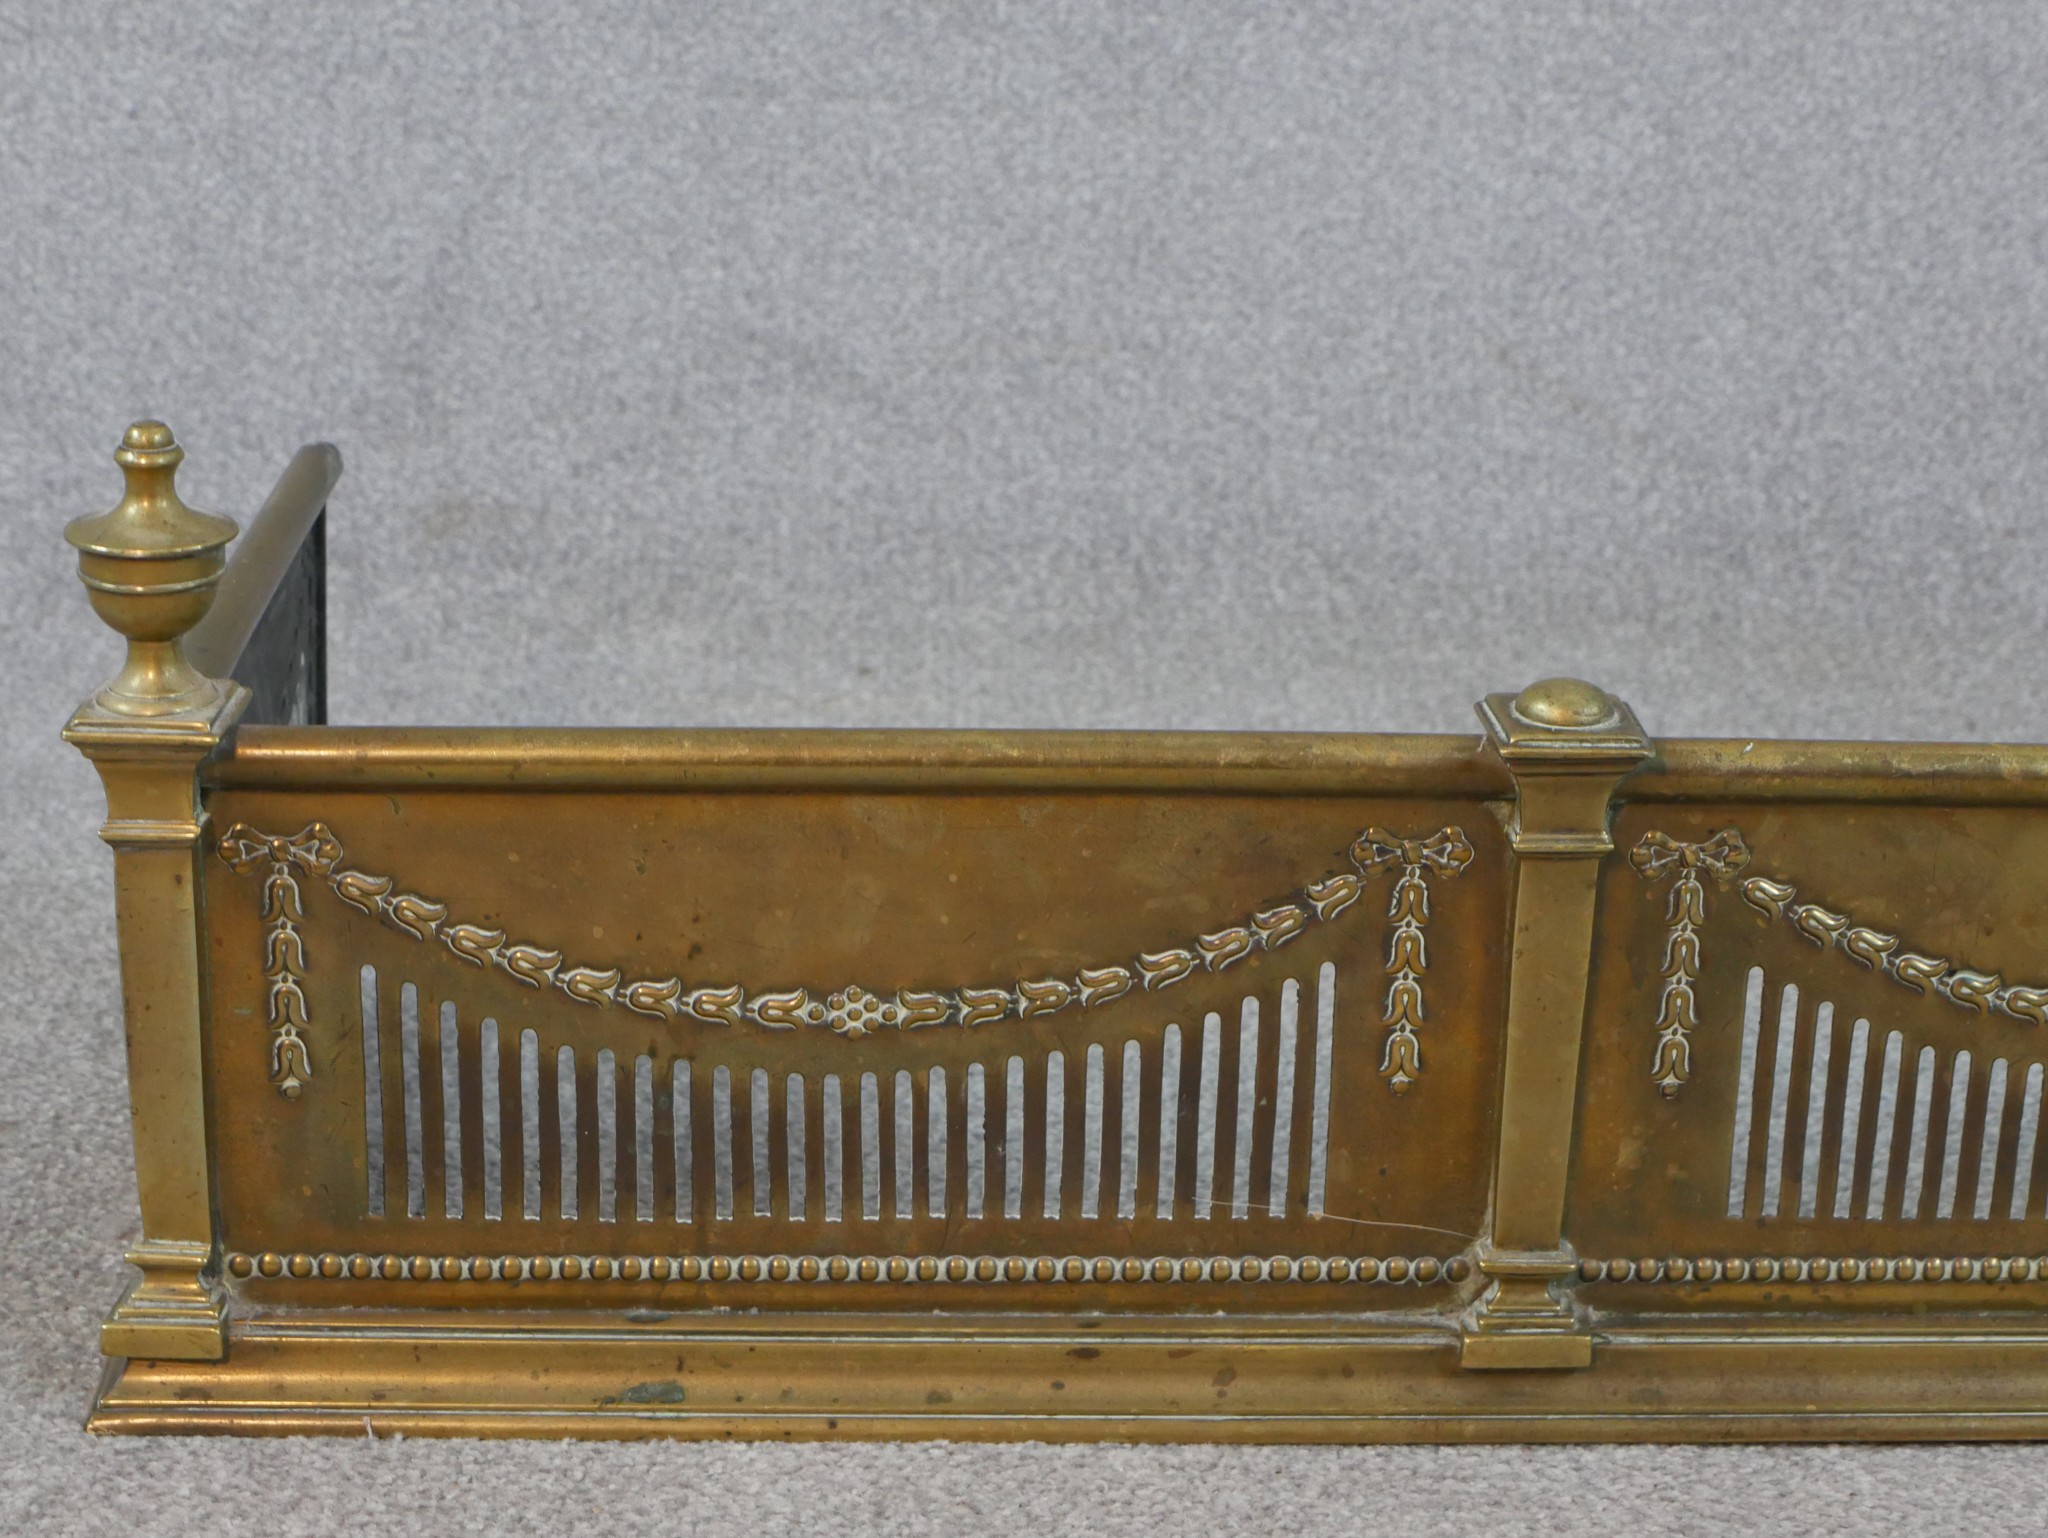 An Adam style pierced brass fender, with urn finials to the corners, decorated with swags and a - Image 4 of 4